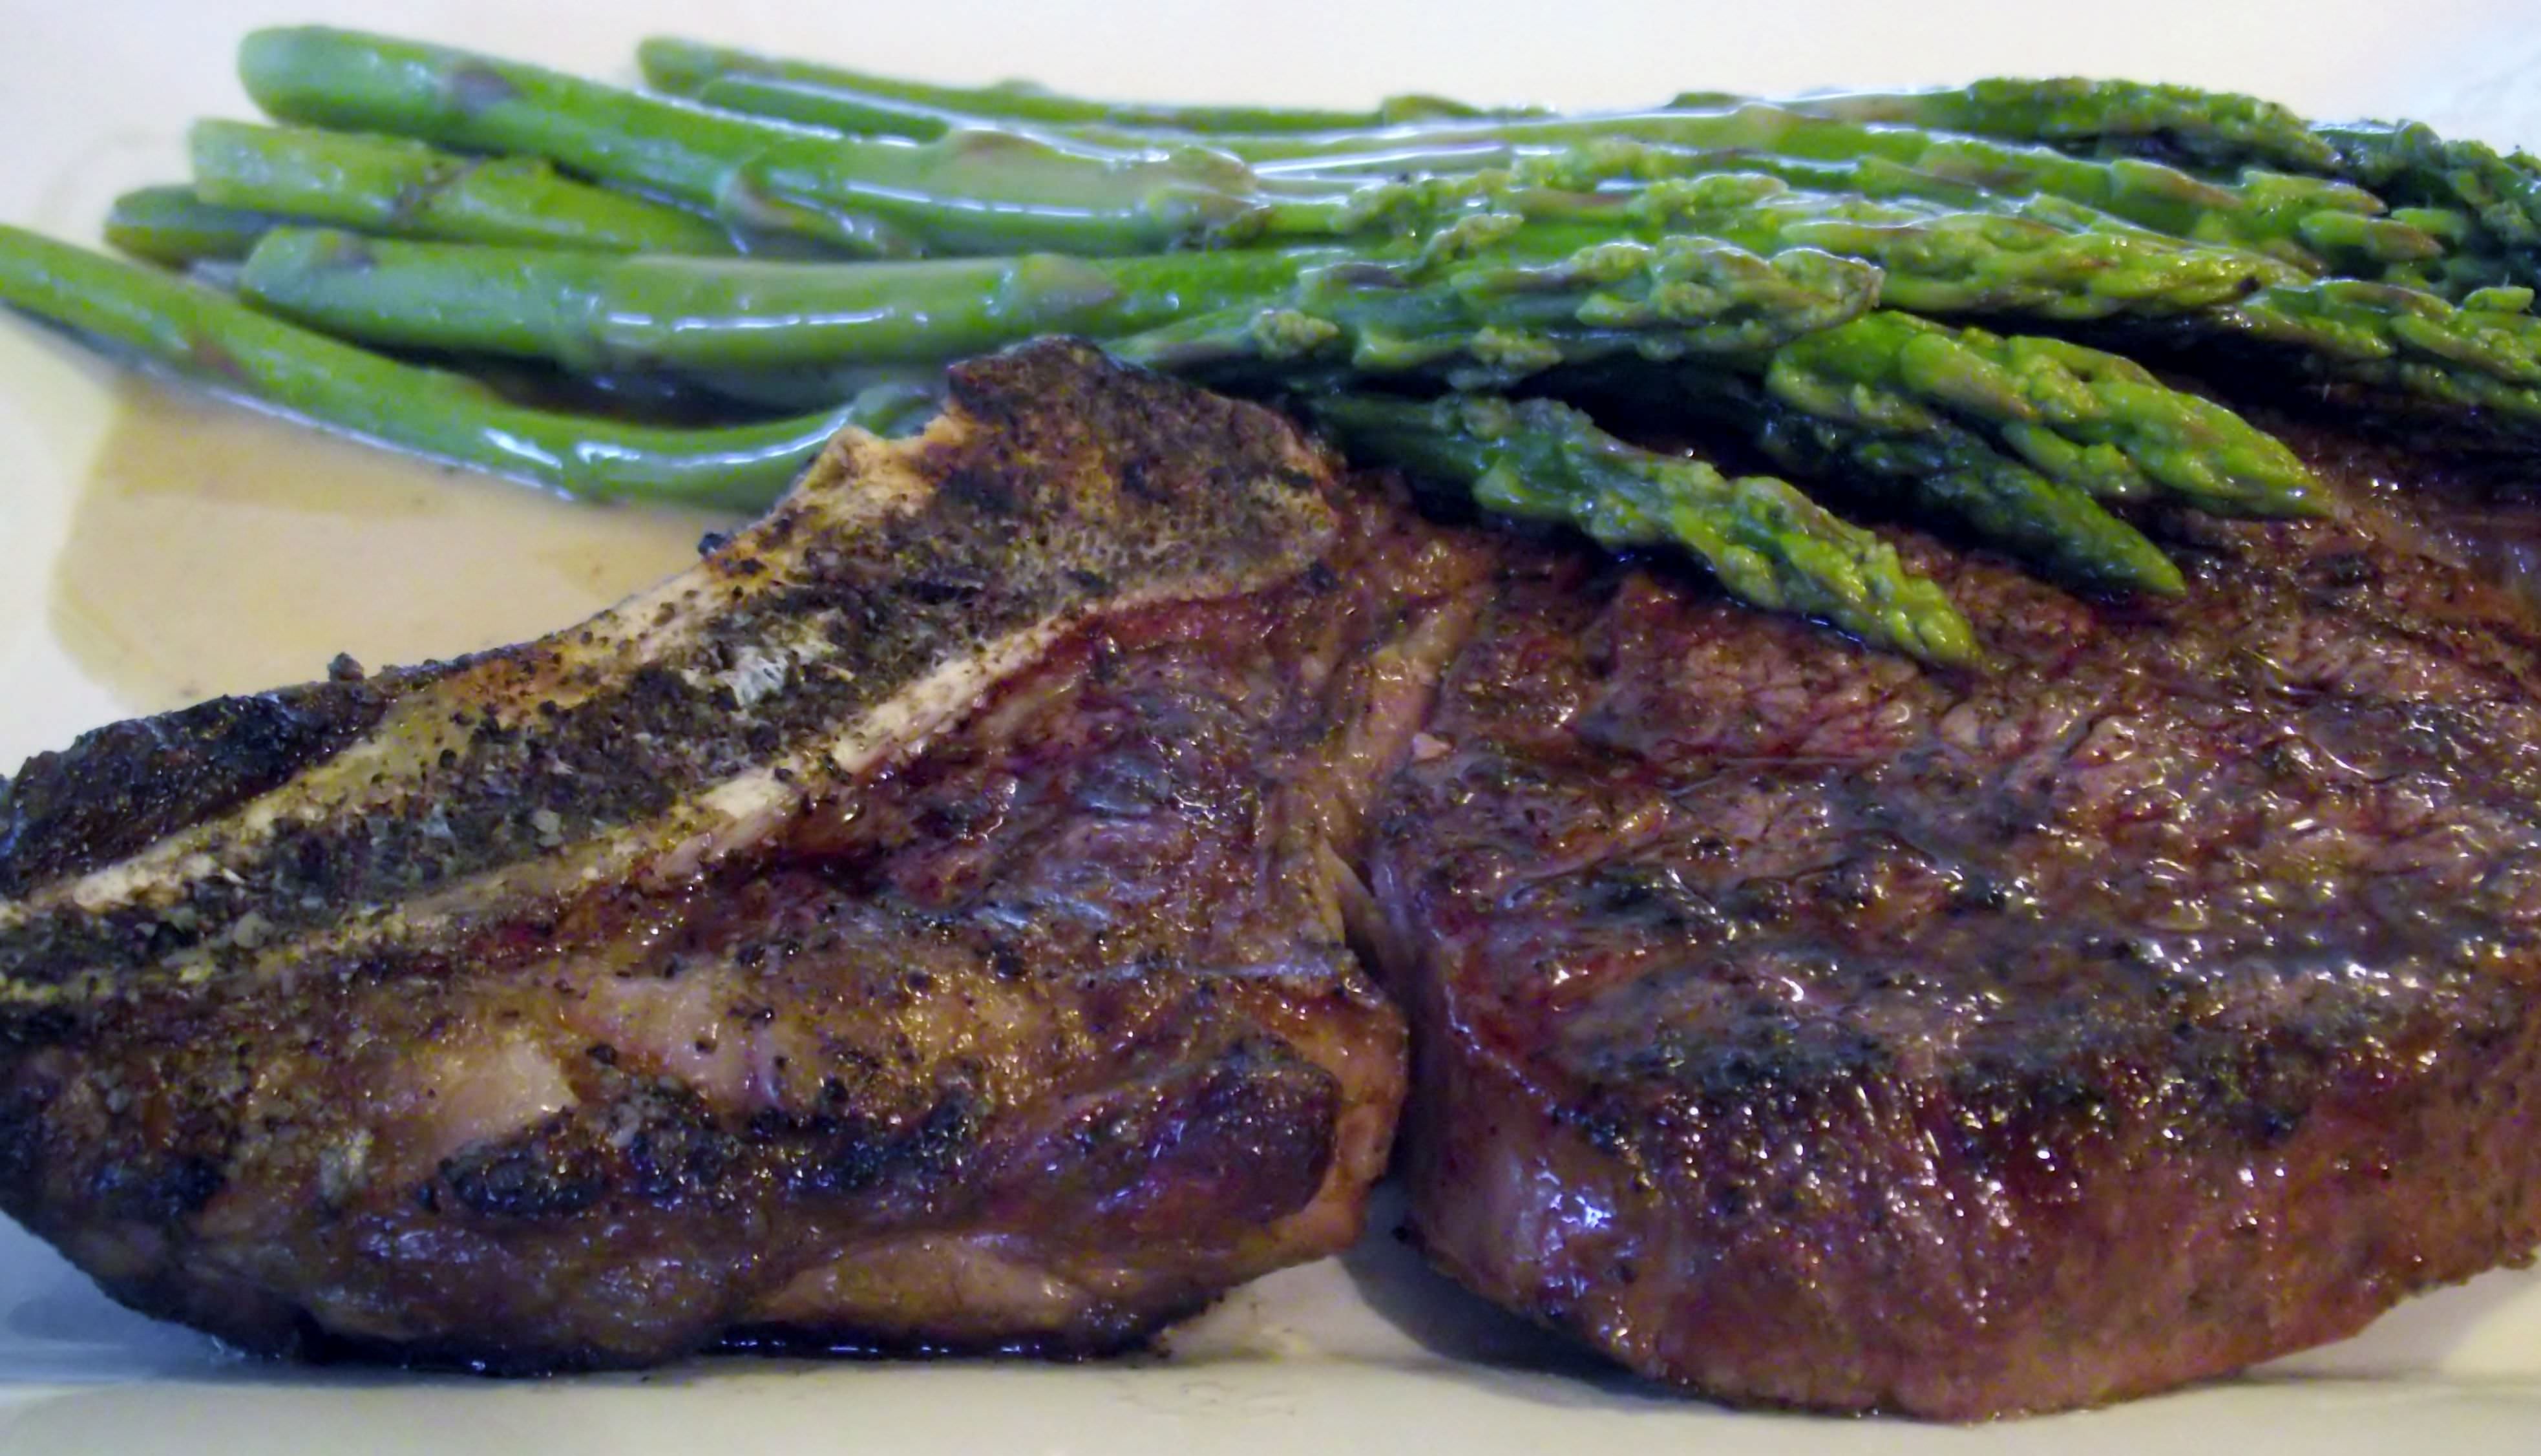 Grilled beef ribeye, sautee asparagus, and beurre blanc.